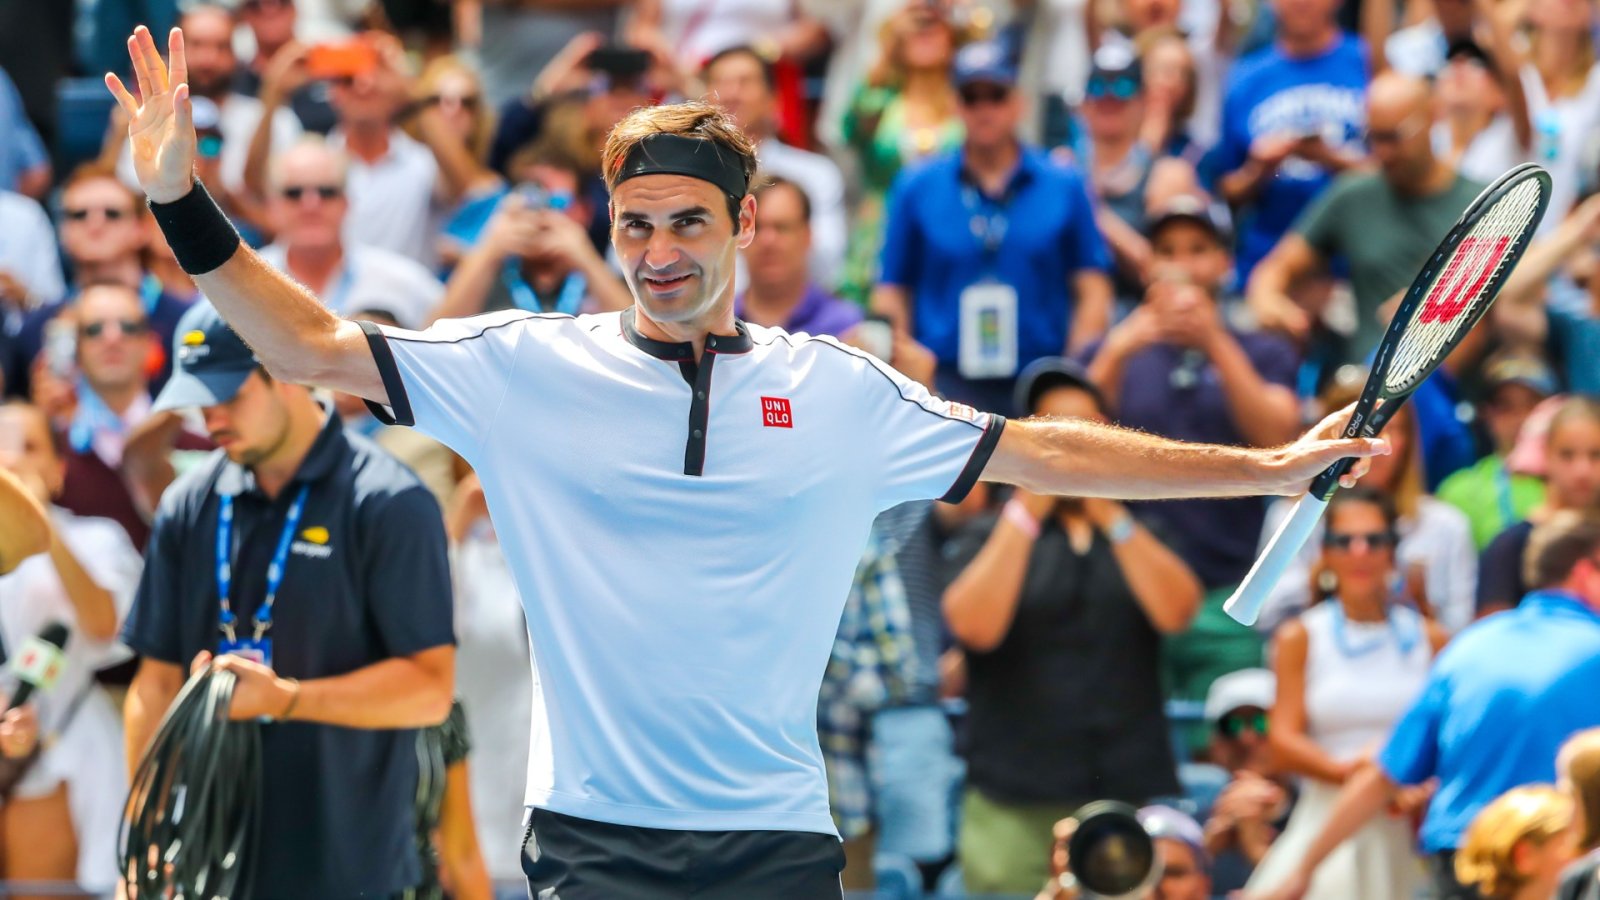 Another all-time tennis star retires: Roger Federer